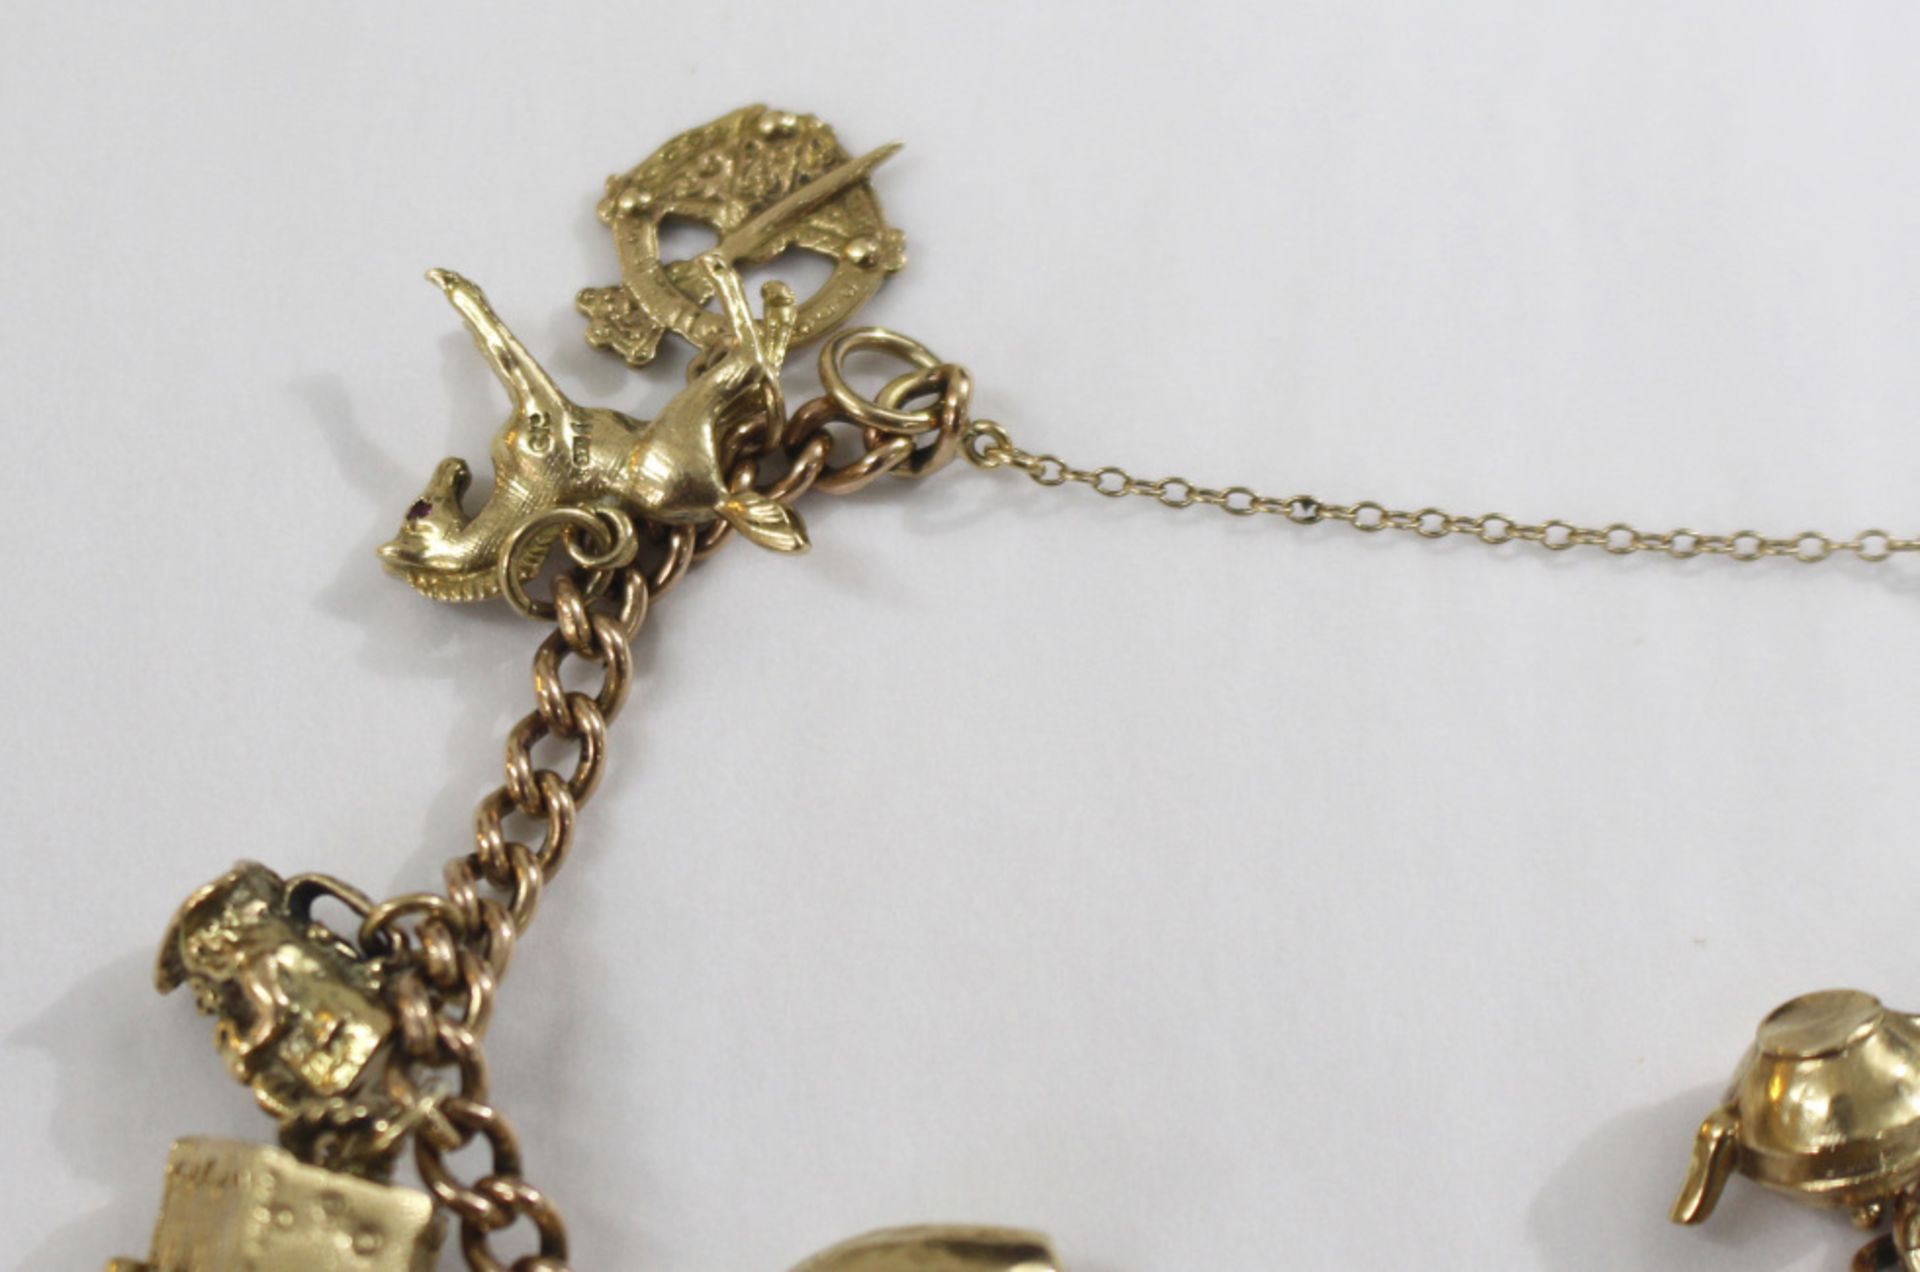 9ct Gold Vintage Charm Bracelet with 14 Charms - Image 3 of 10